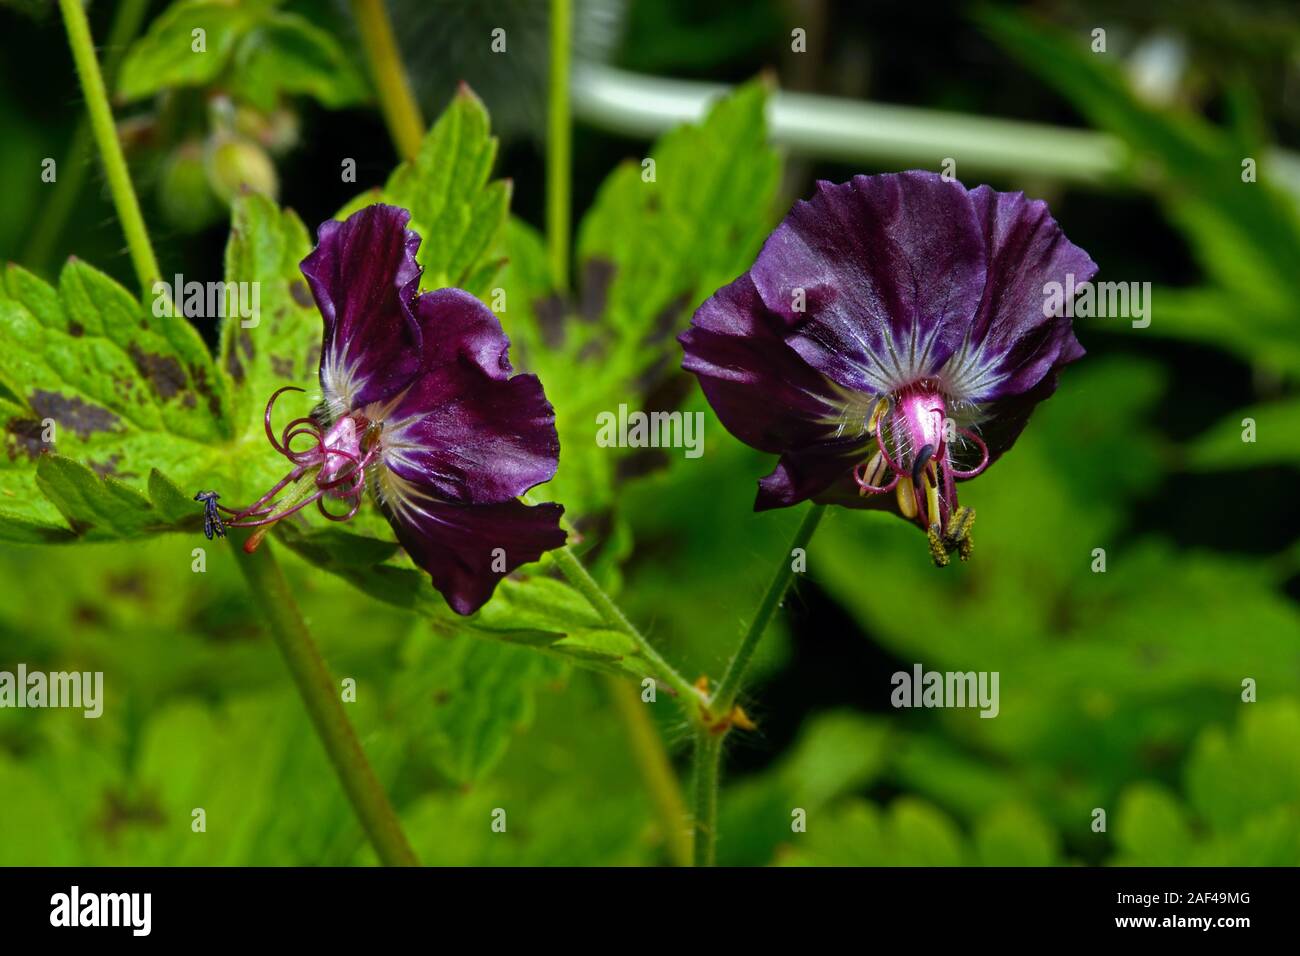 Geranium phaeum (dusky crane's-bill) is native to Europe where it grows in open meadows, roadside verges and in damp forest. Stock Photo